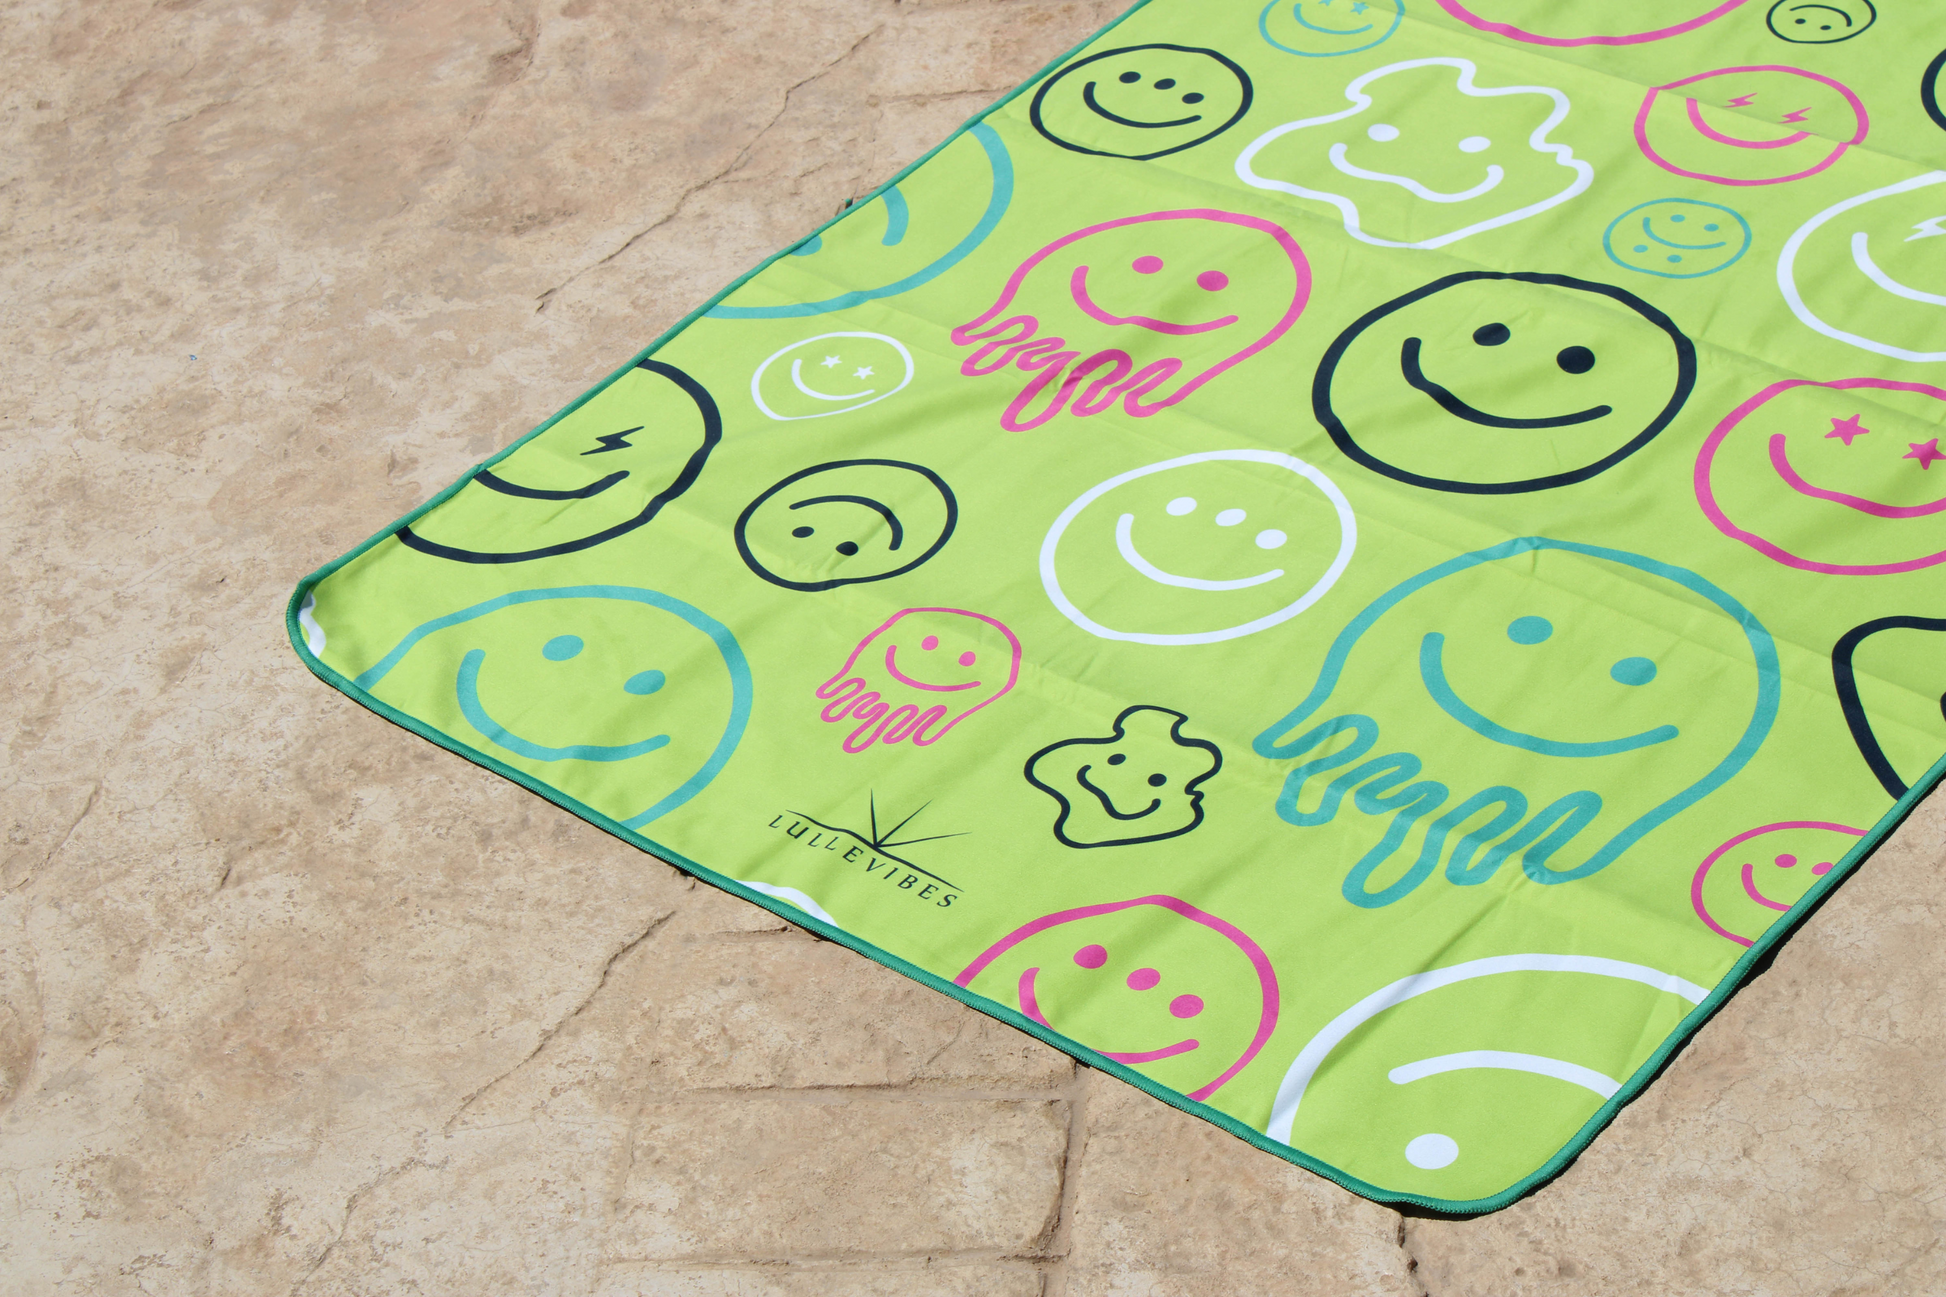 filter#towel-designs=all-smiles